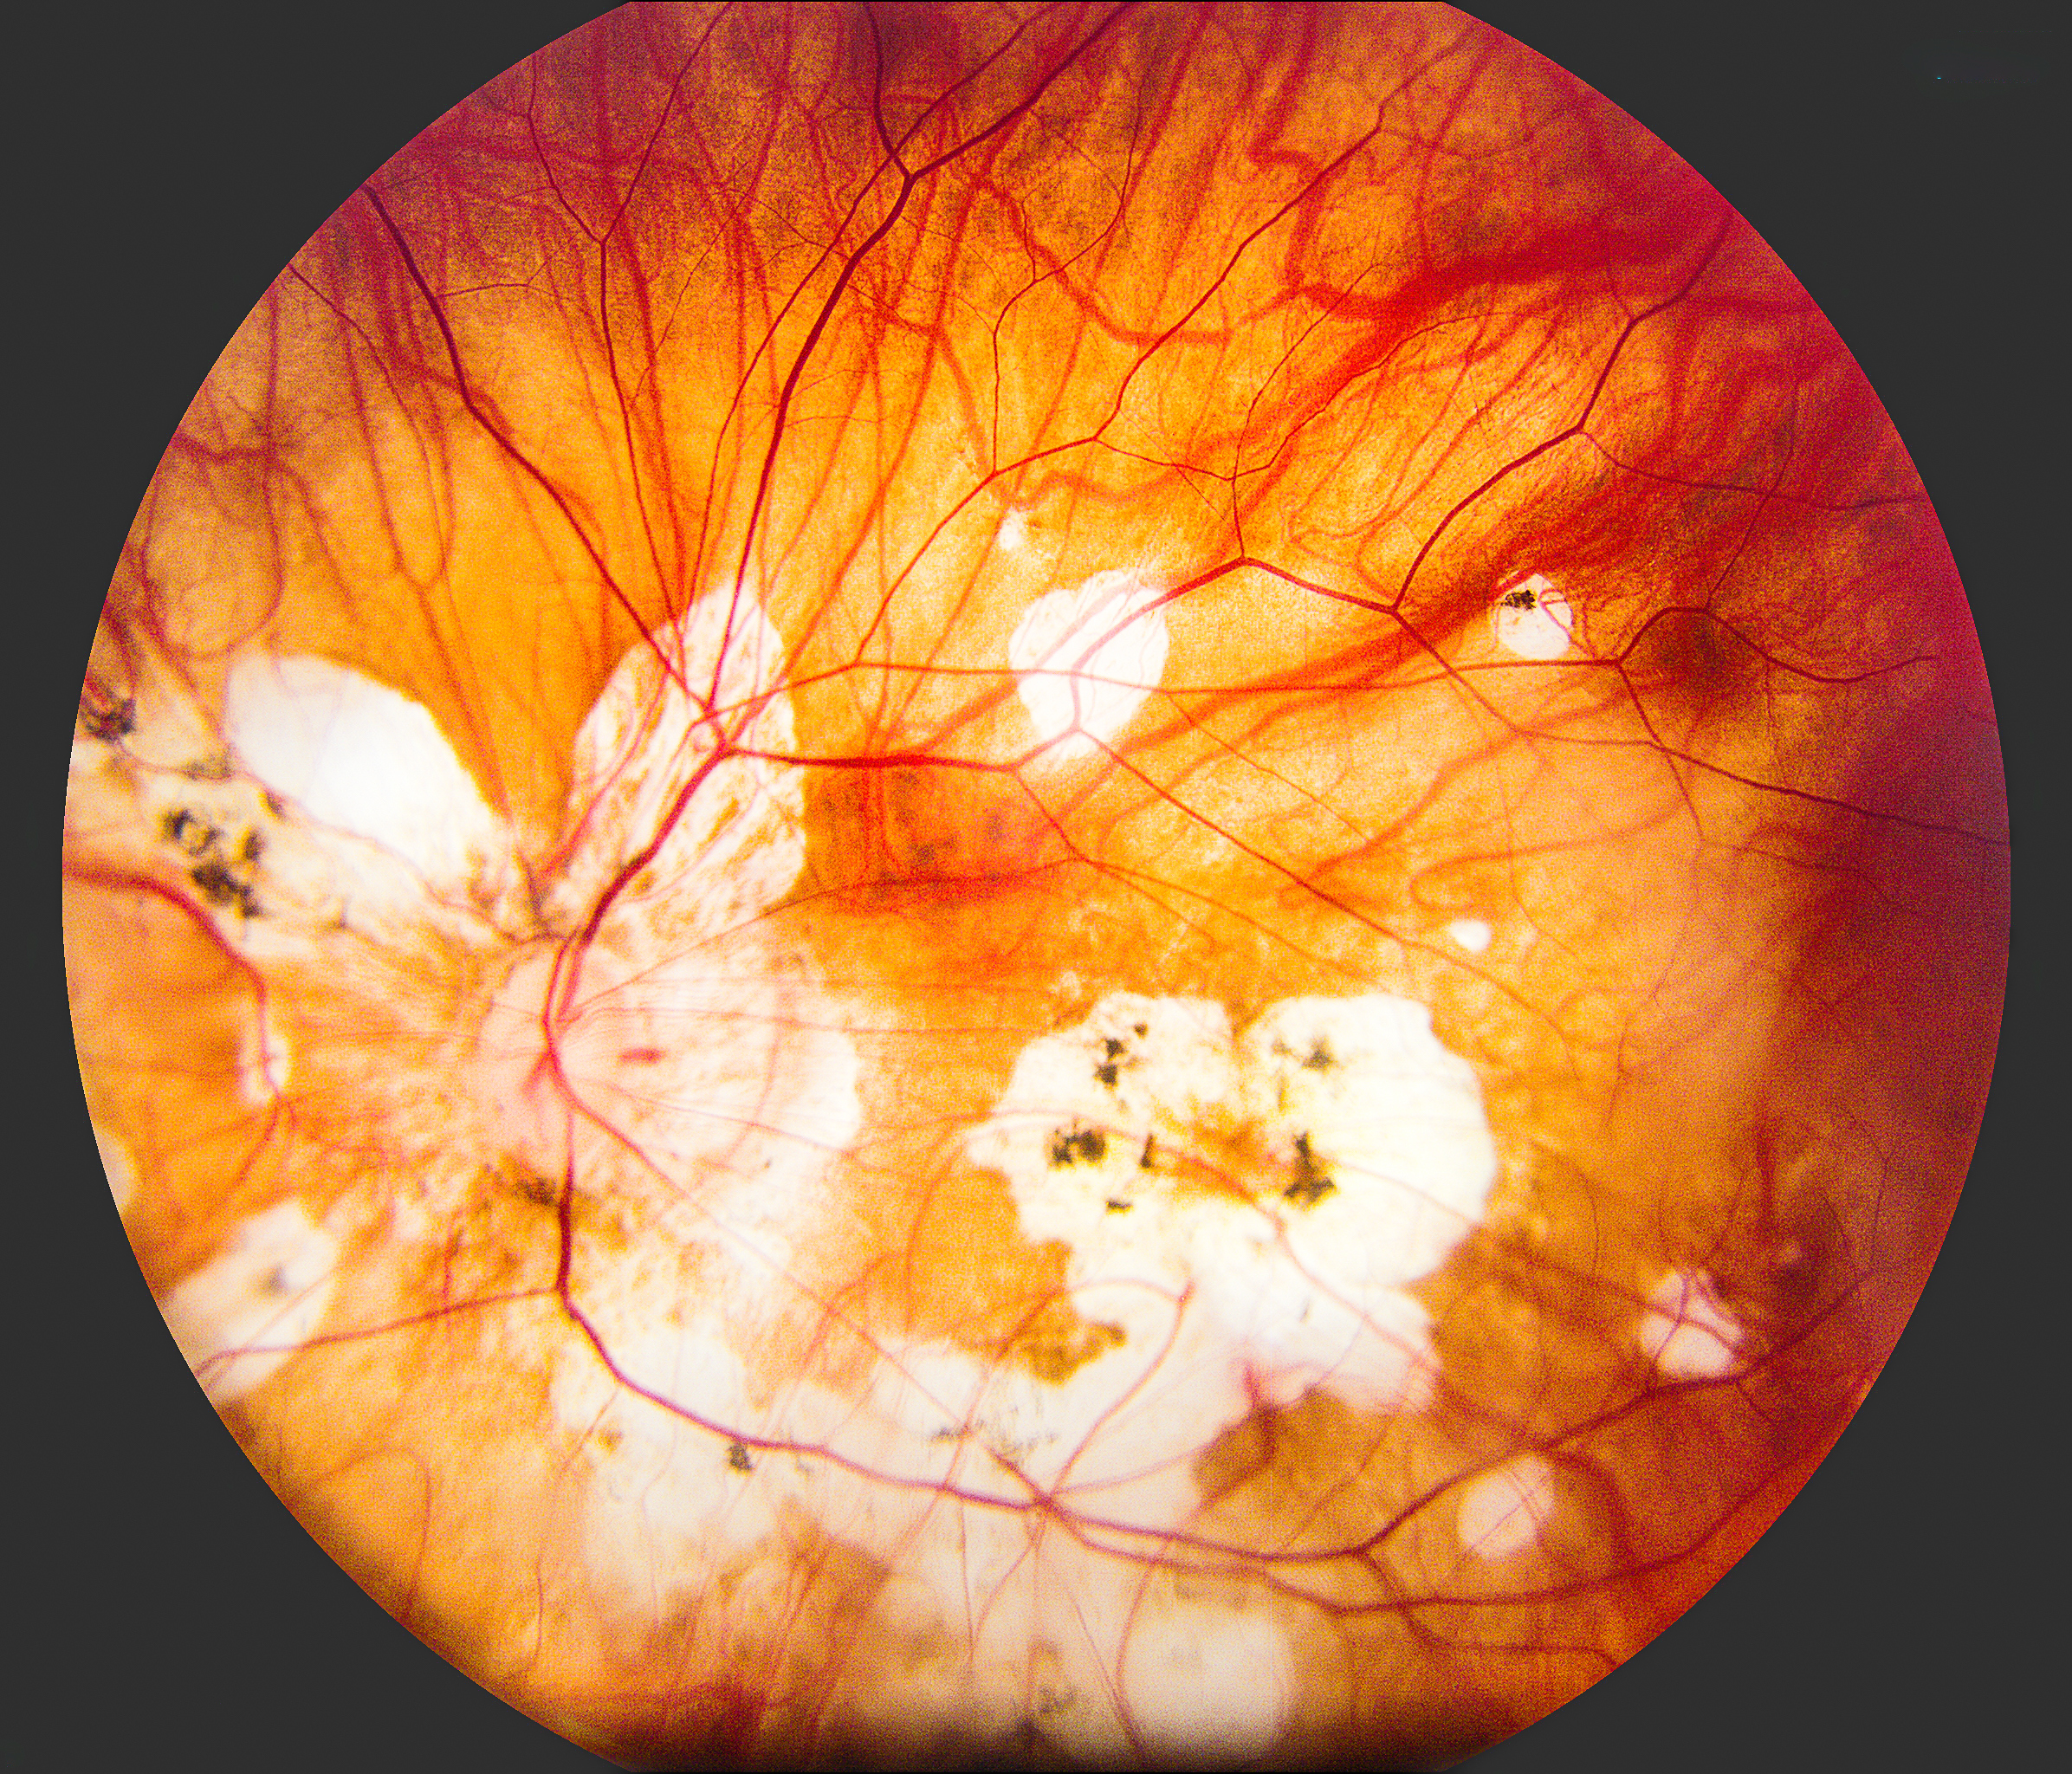 Retinal Artery Occlusion: Symptoms and Treatment